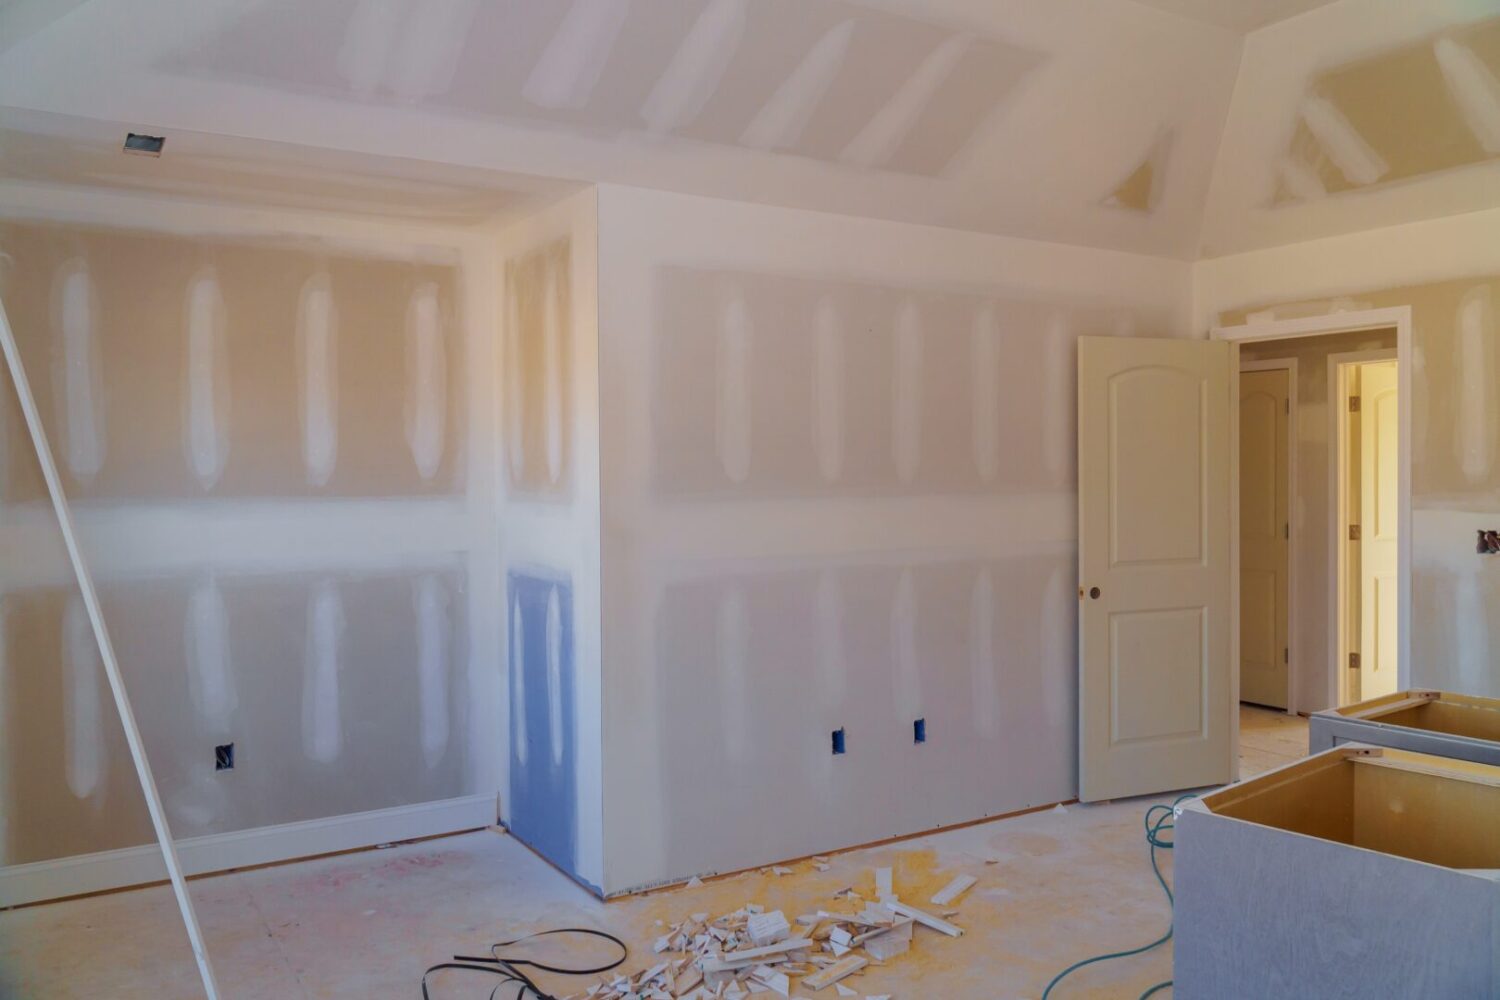 walls plasterboards with room under construction with finishing putty in the room